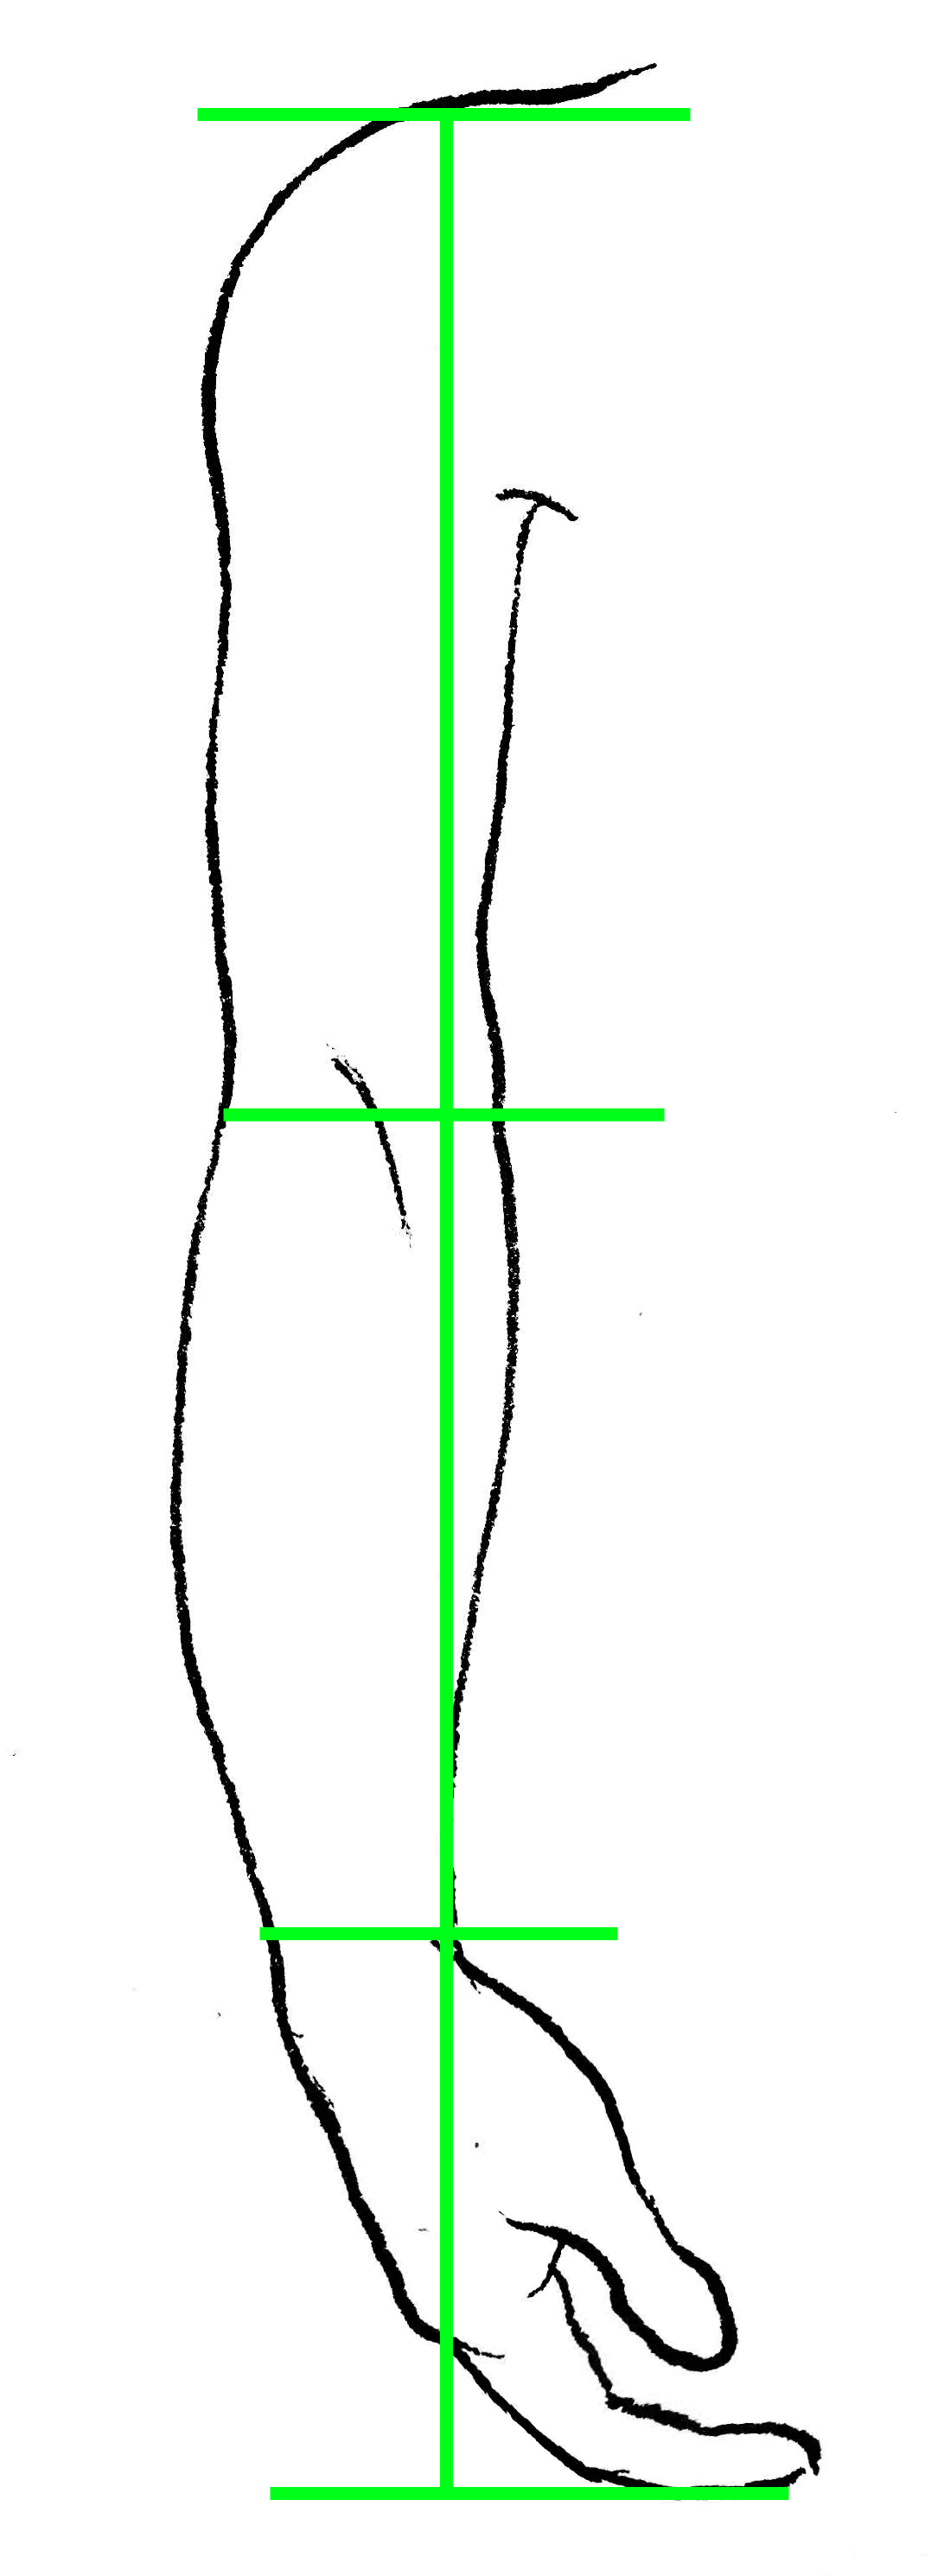 Drawing of Arm with Segments Indicated